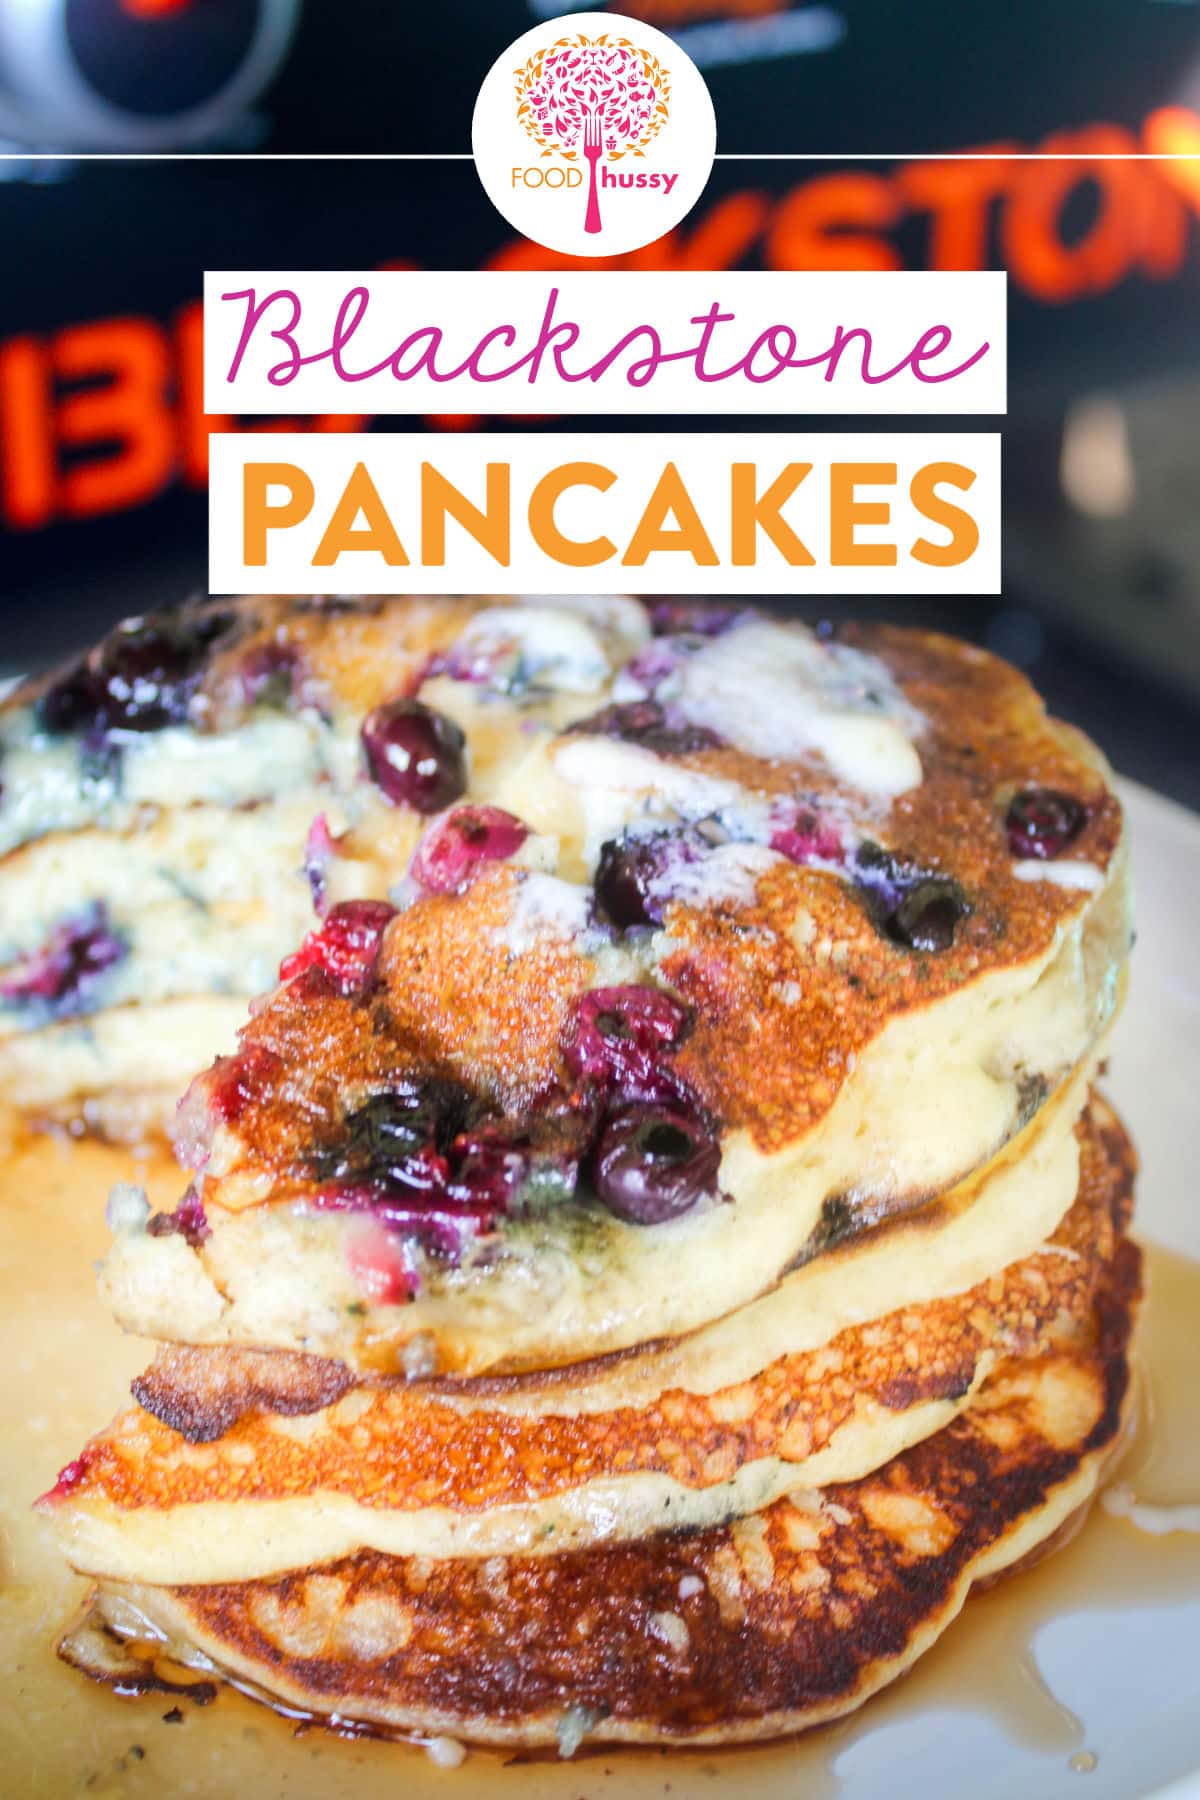 Blackstone Pancakes are now my favorite way to make this breakfast treat! You can do a bunch at once and customize them for each person! Light, fluffy and oh-so-tasty! via @foodhussy